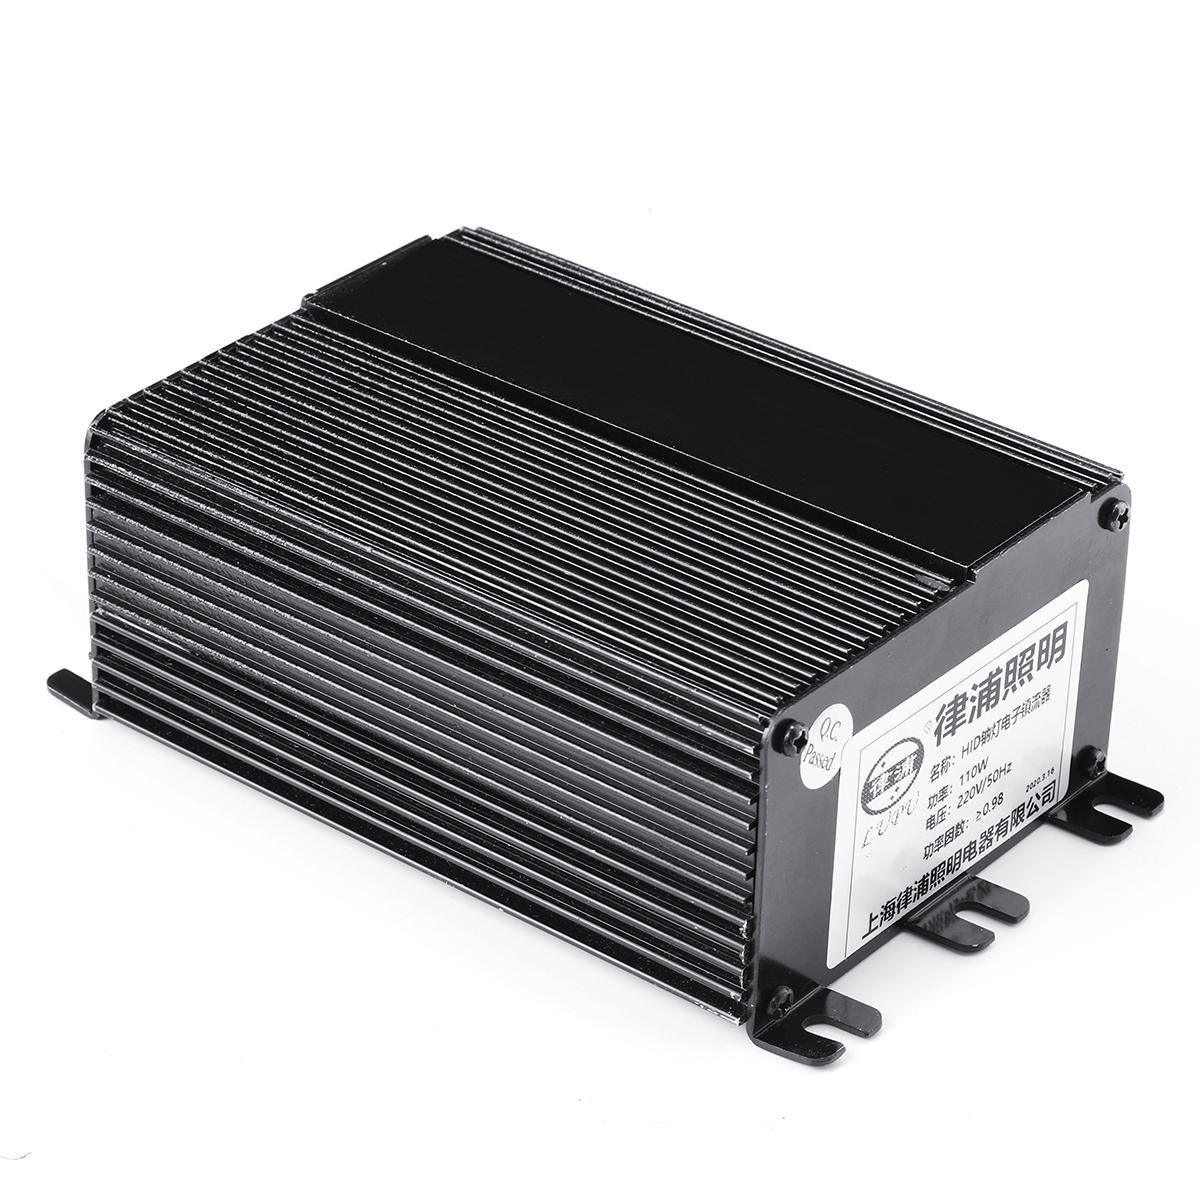 70100110150250400W-Electronic-Ballast-Gas-Air-Ballast-for-NG-High-pressure-Sodium-Lamp-1704214-7